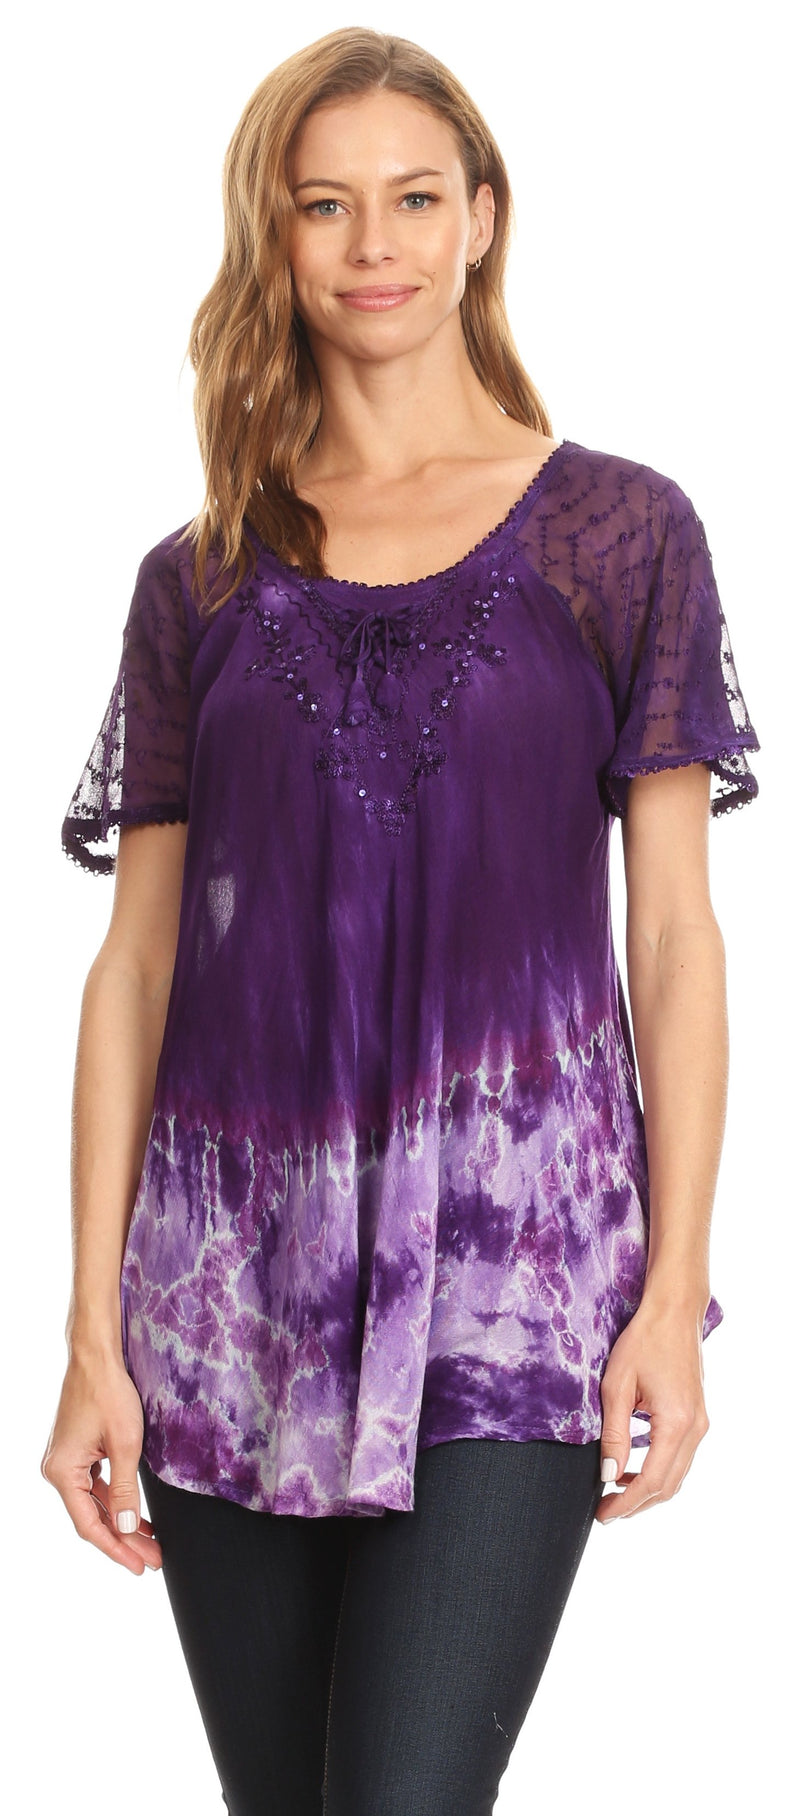 Sakkas Clarice Petite Raglan Lace Up Tie Dye Blouse with Embroidery and Sequins